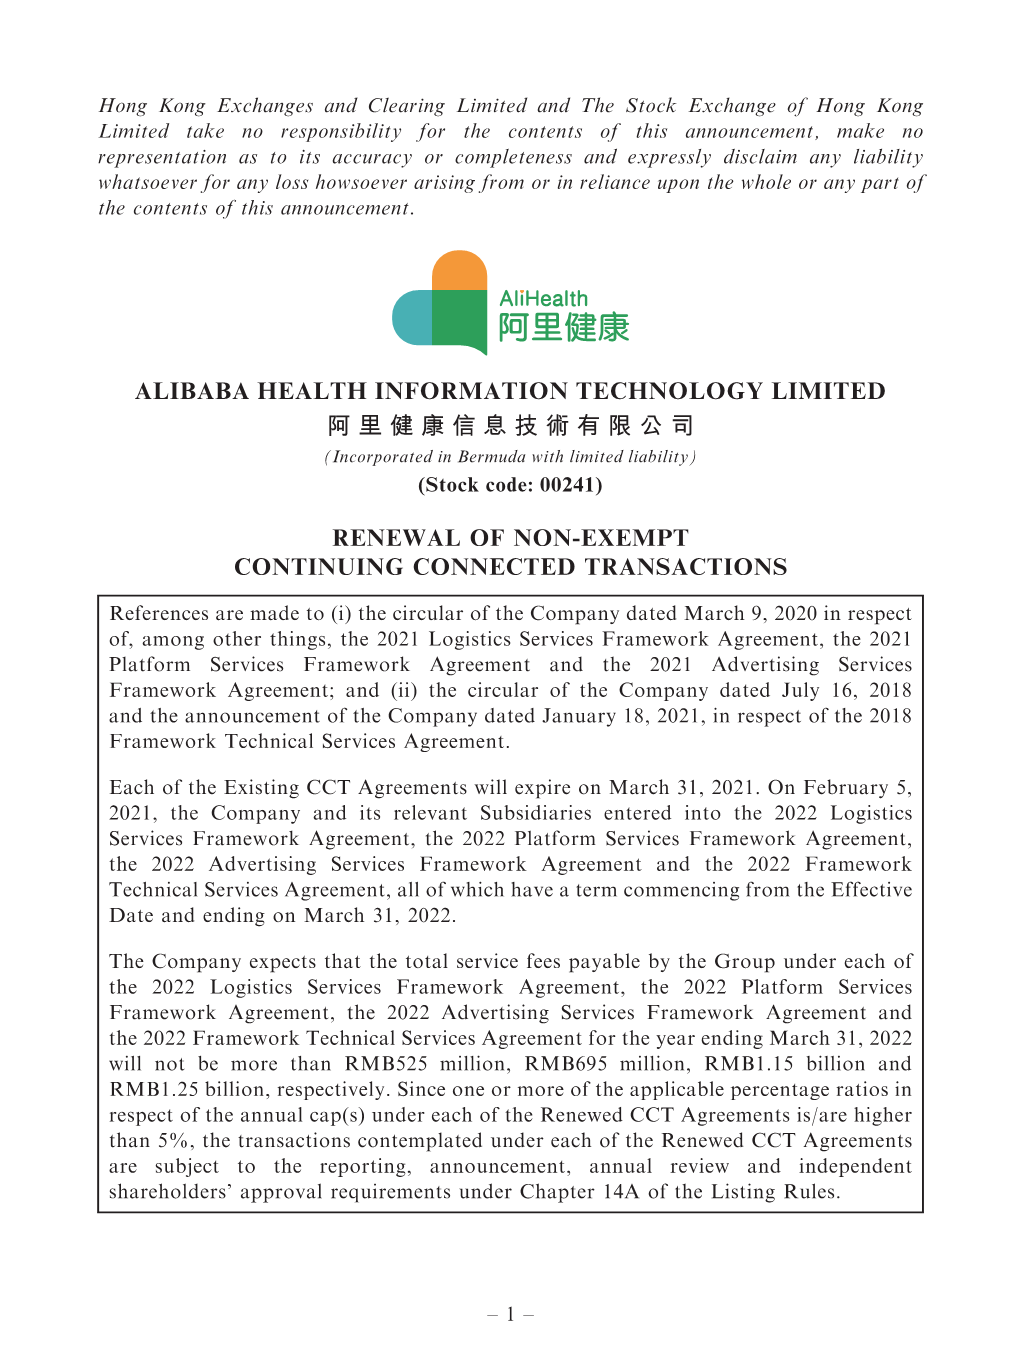 ALIBABA HEALTH INFORMATION TECHNOLOGY LIMITED 阿里健康信息技術有限公司 (Incorporated in Bermuda with Limited Liability) (Stock Code: 00241)